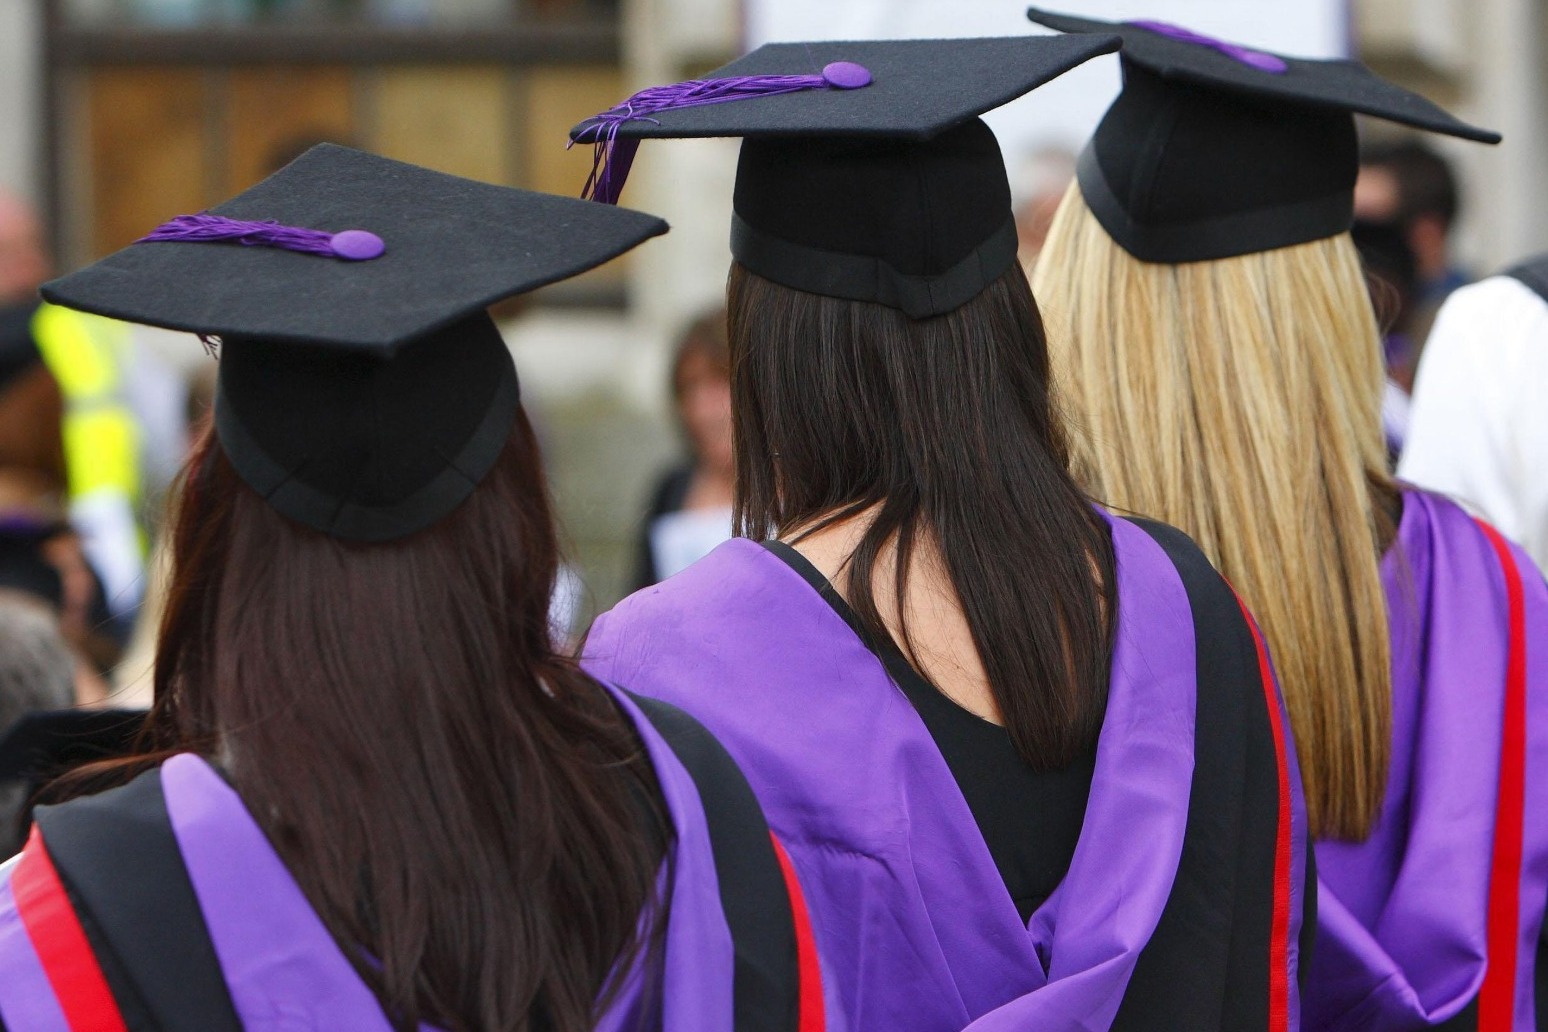 Poorest students could graduate from university with £60,000 debt 